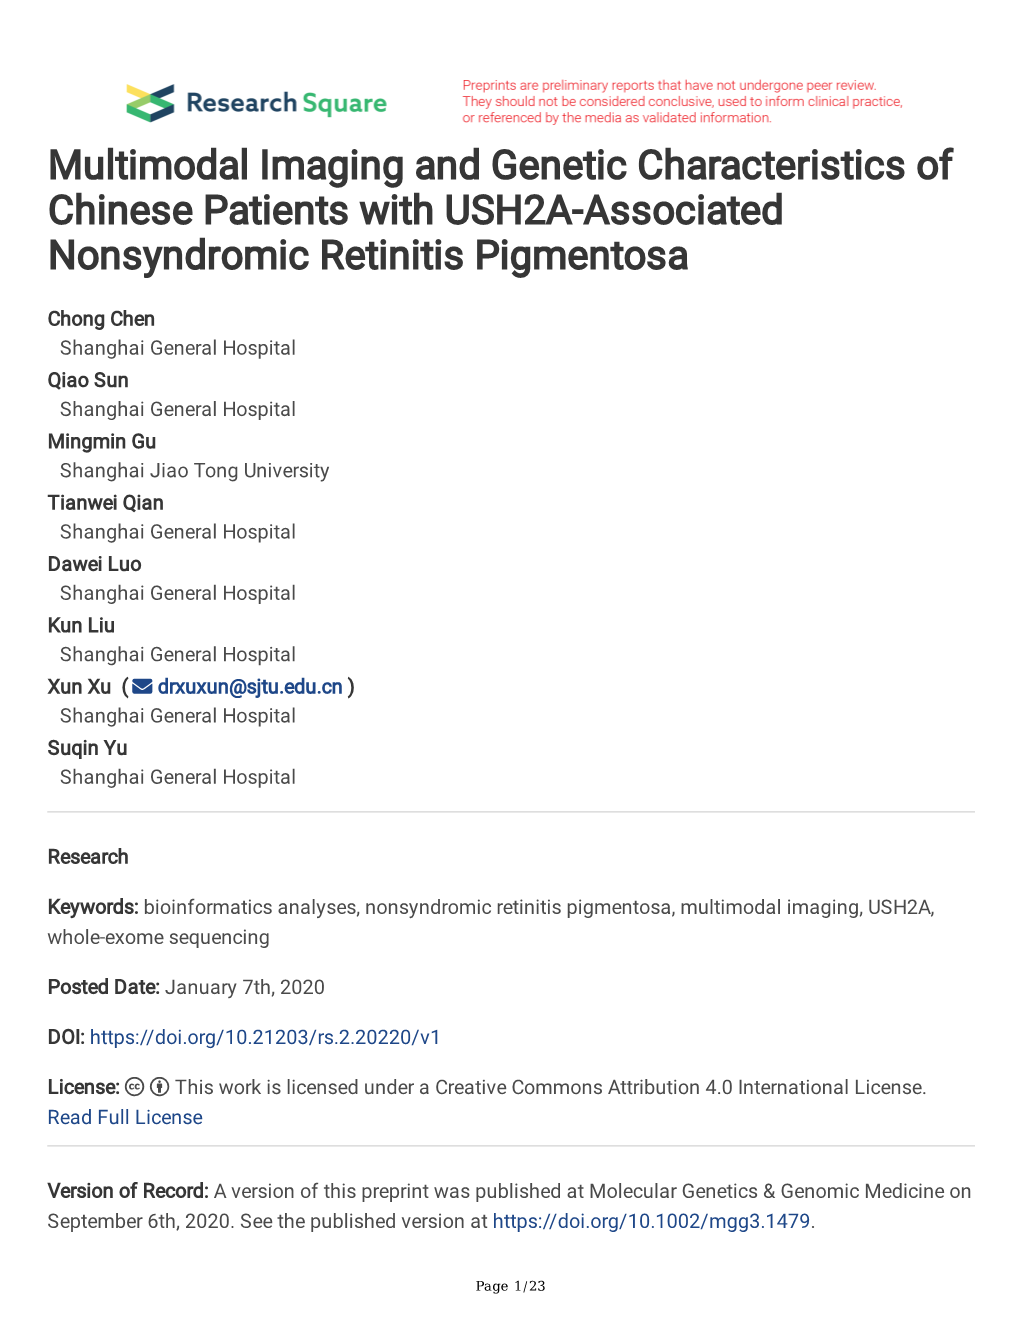 Multimodal Imaging and Genetic Characteristics of Chinese Patients with USH2A-Associated Nonsyndromic Retinitis Pigmentosa